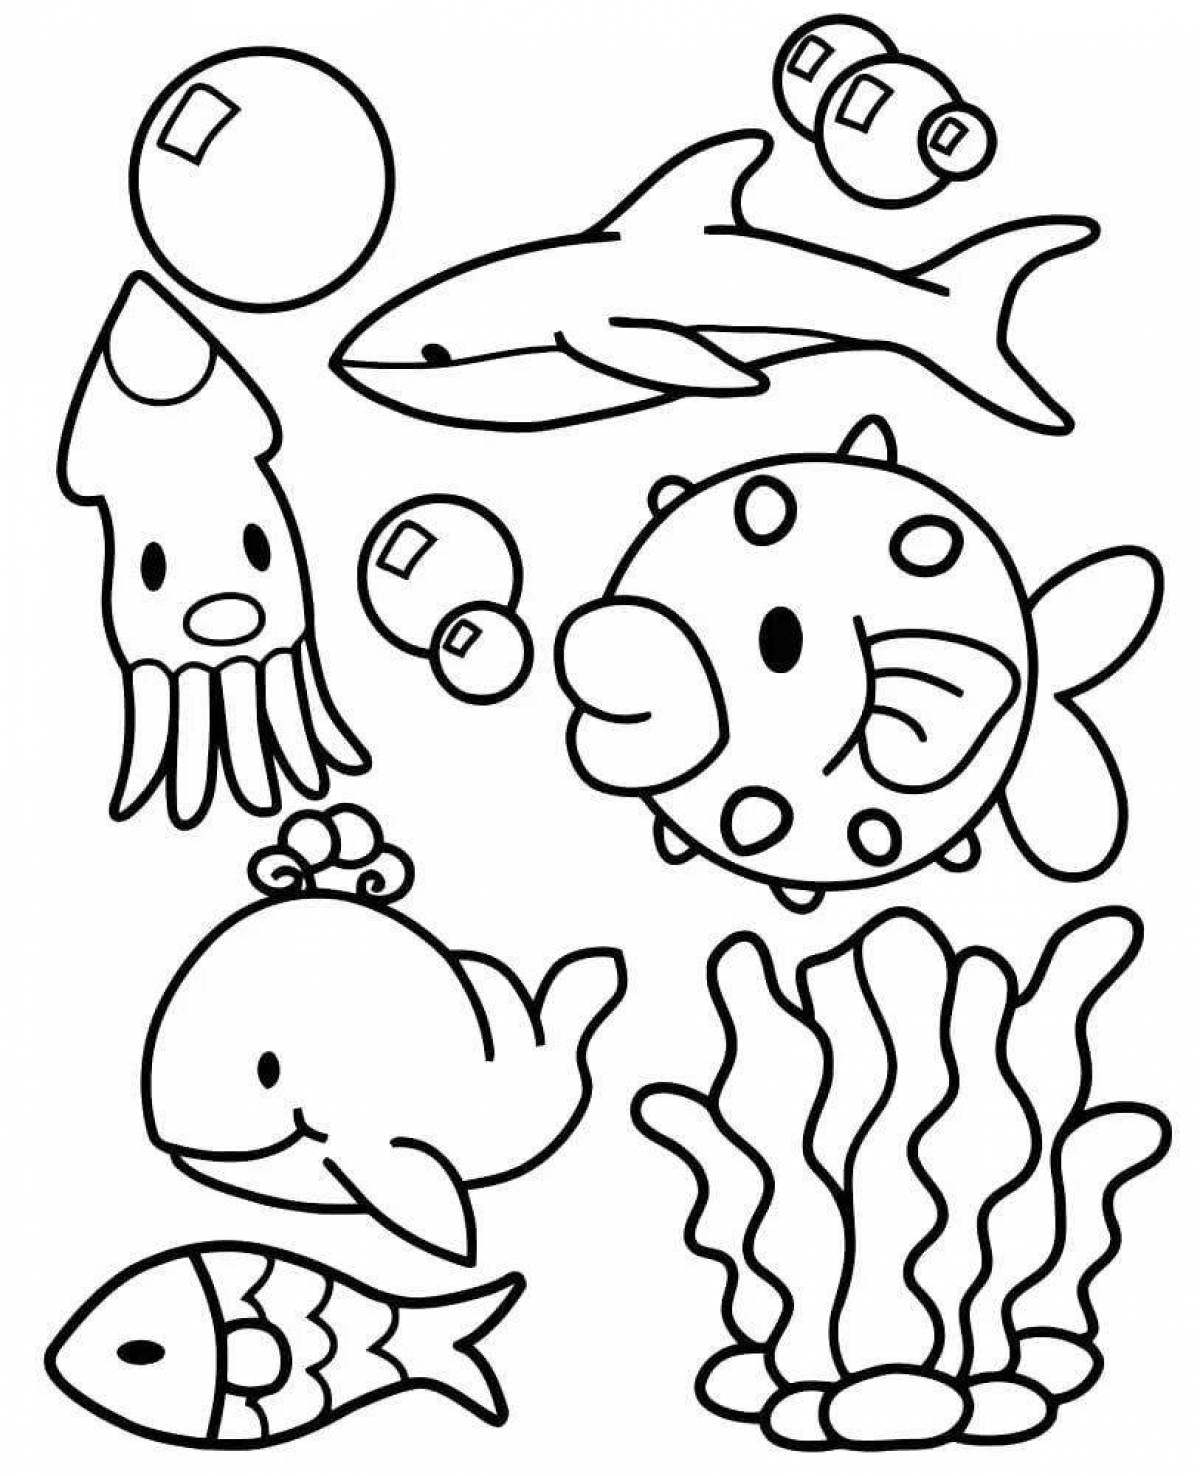 Amazing marine life coloring page for 3-4 year olds